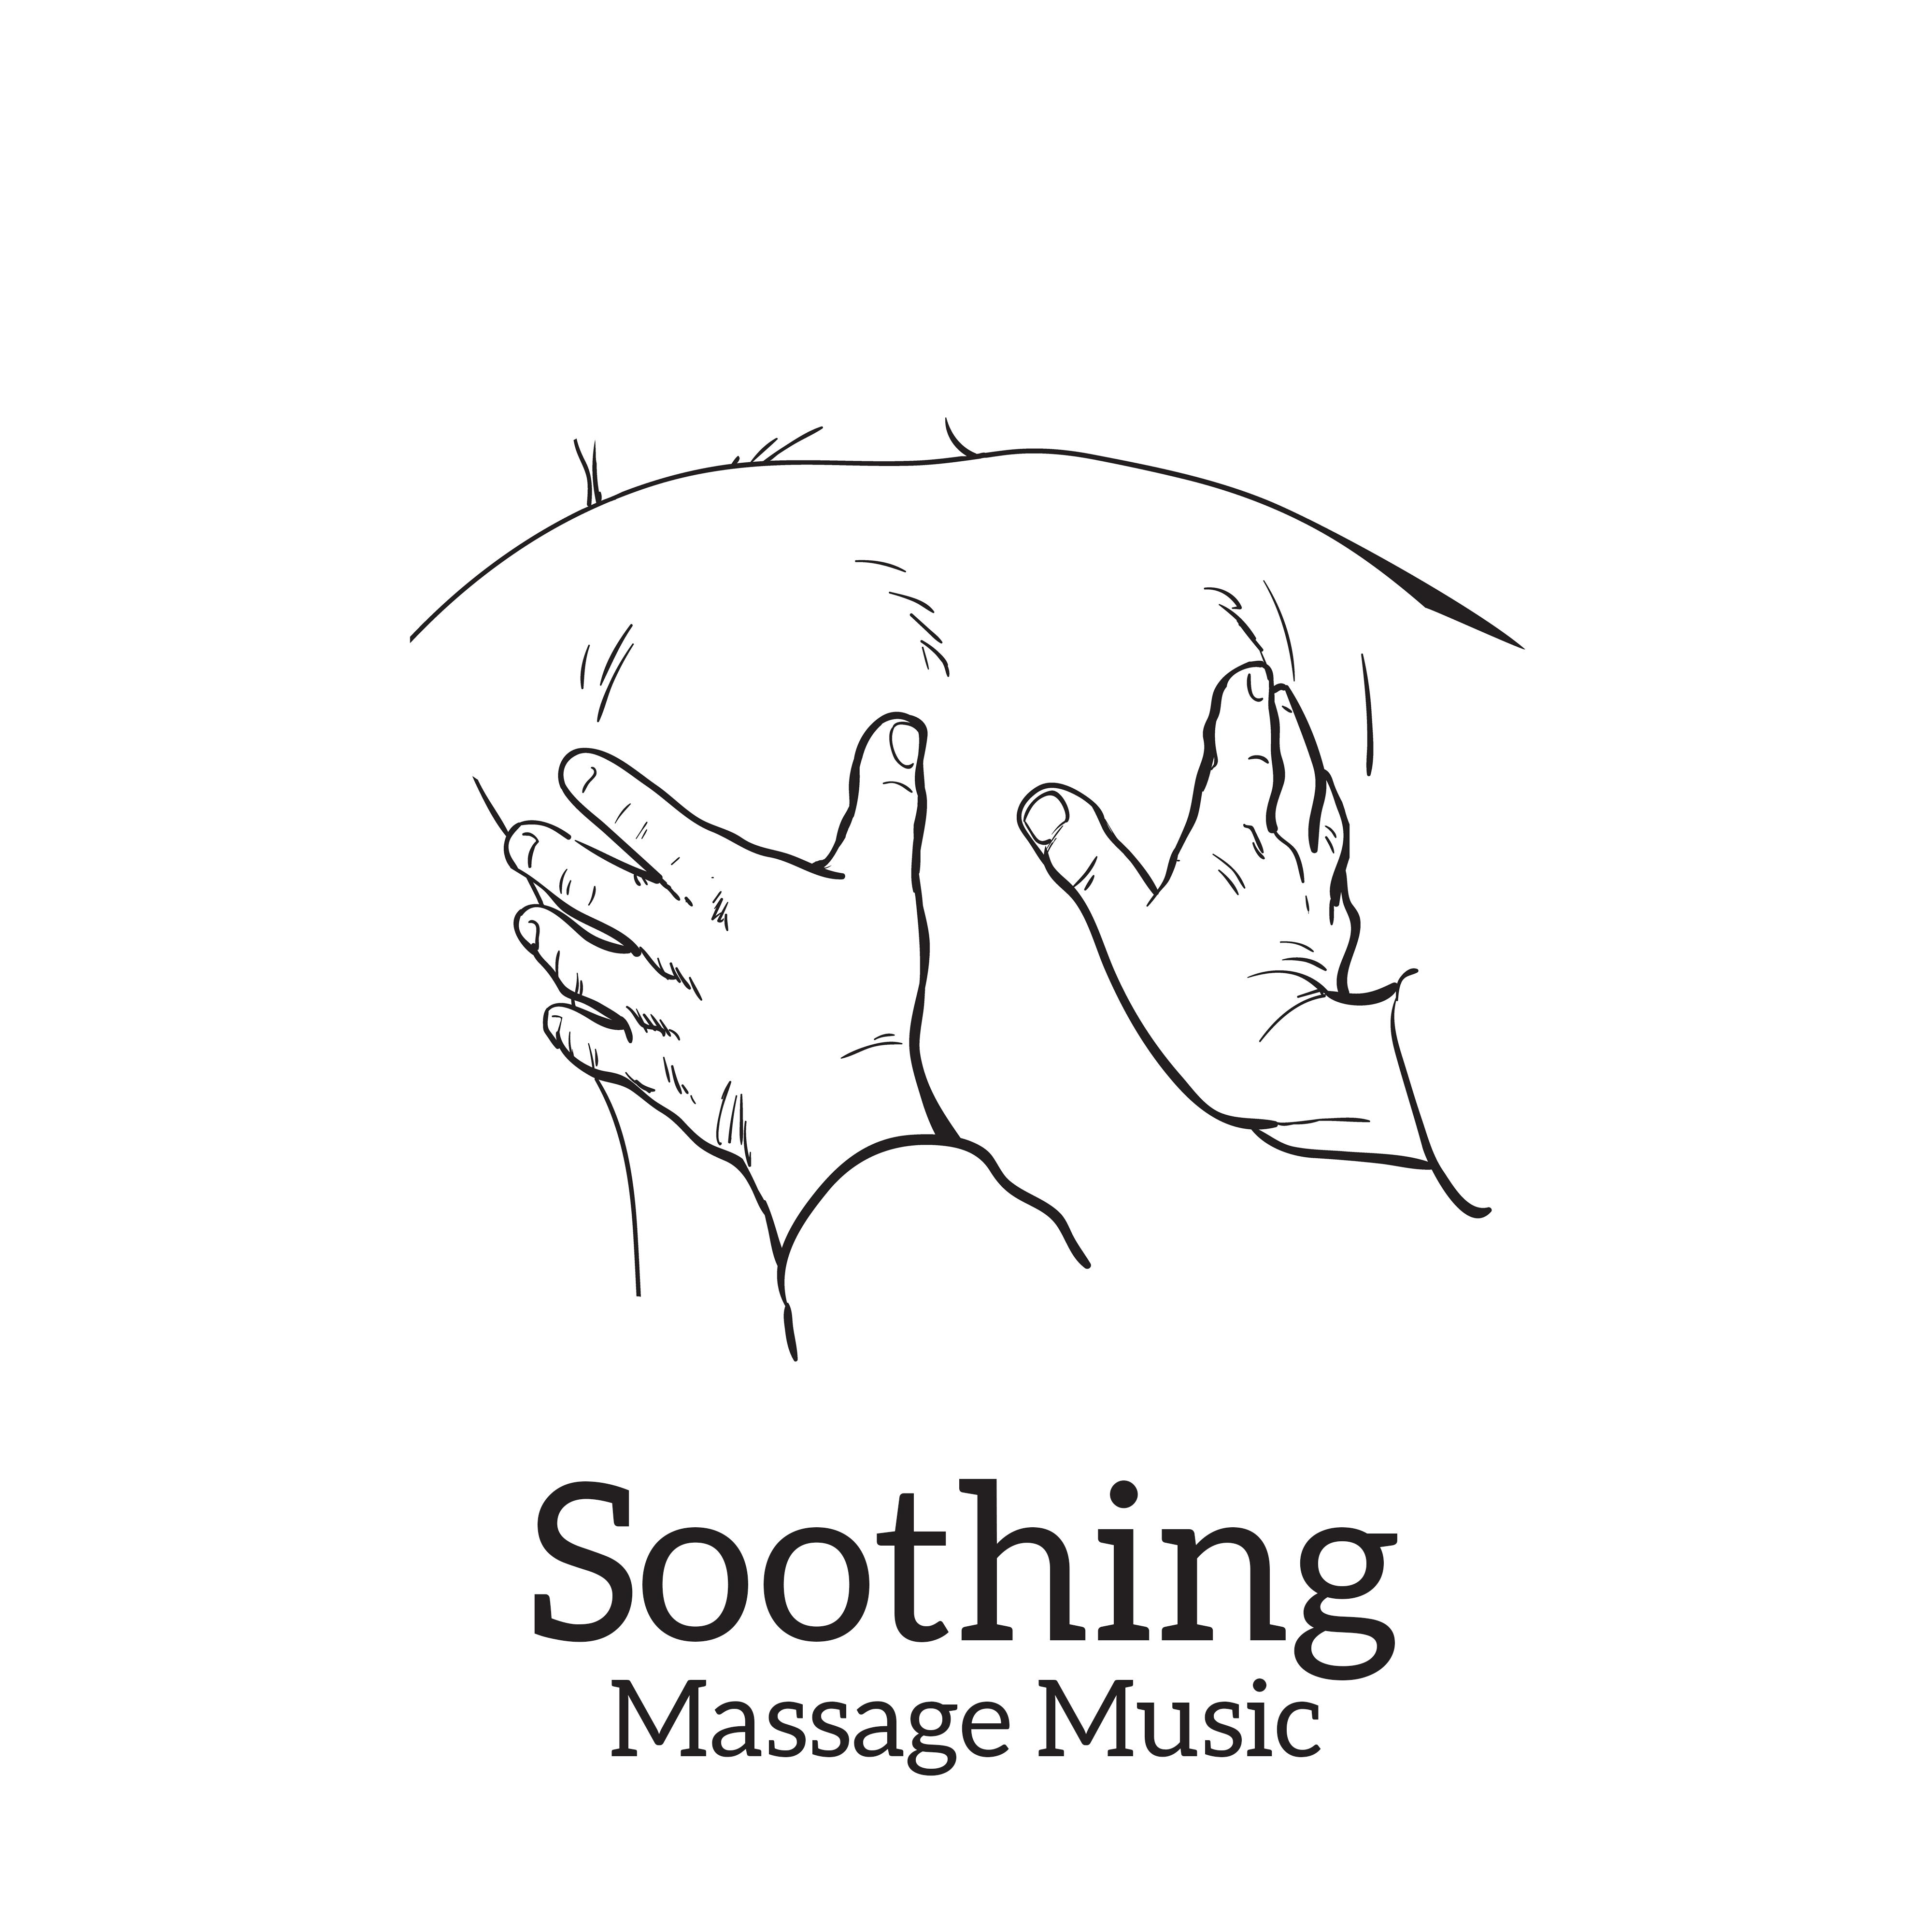 Soothing Massage Music  Deep Relaxation, Inner Harmony, Relaxing Melodies for Spa, Wellness, Sleep, Rest, Relaxing Music Therapy